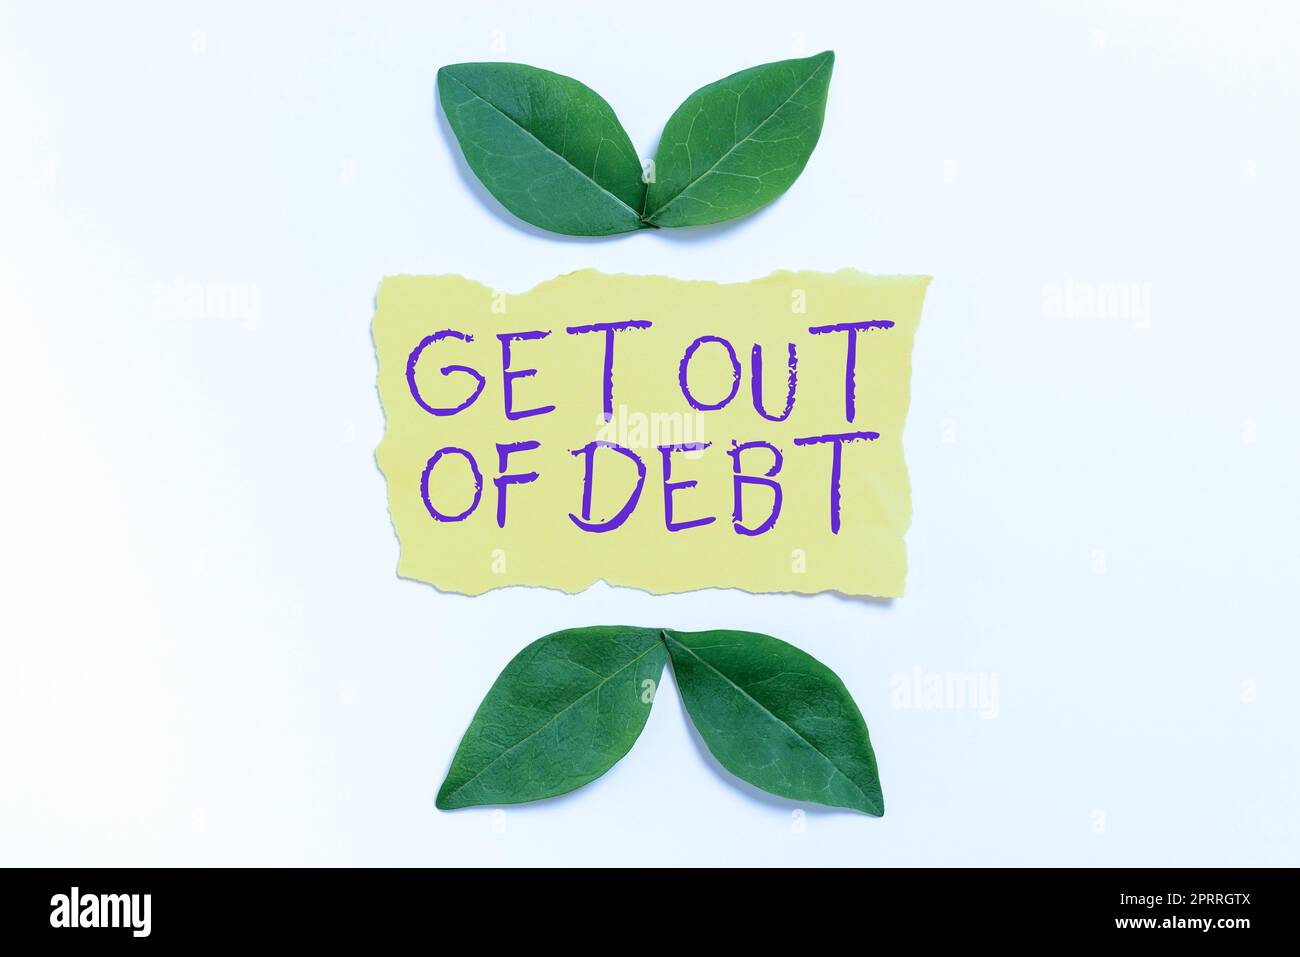 Text caption presenting Get Out Of DebtNo prospect of being paid any more and free from debt. Business concept No prospect of being paid any more and free from debt Stock Photo